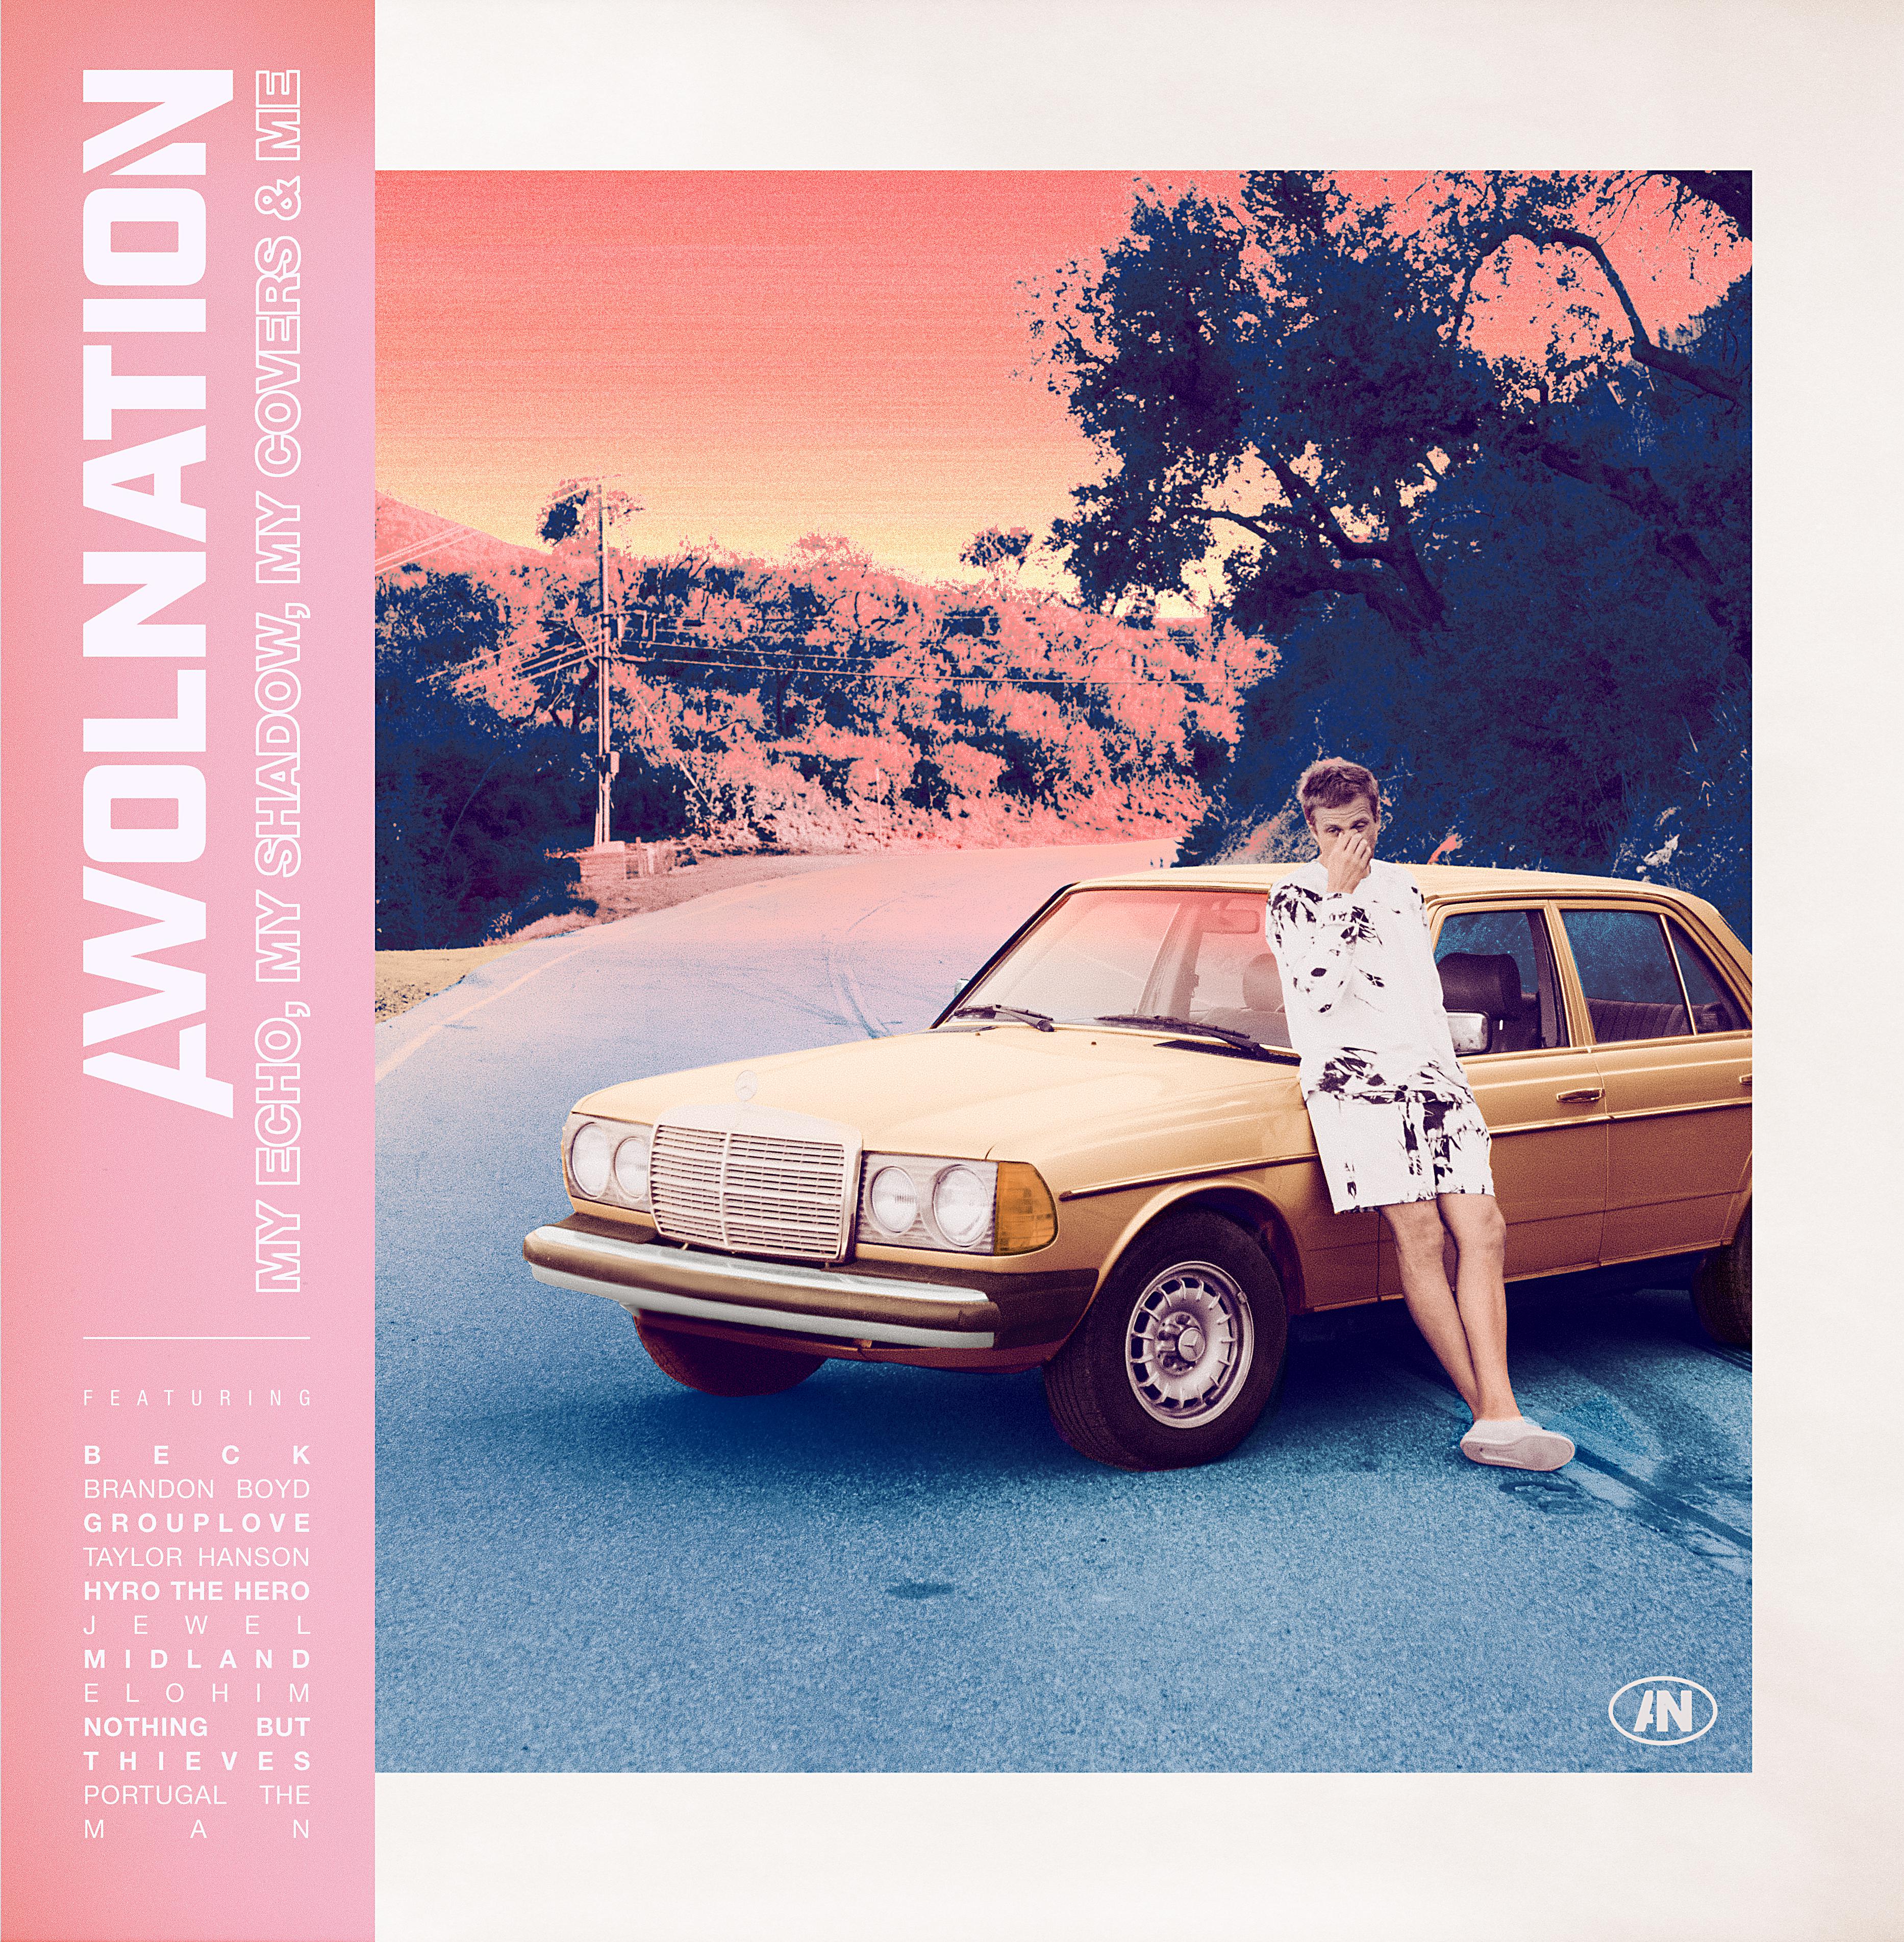 AWOLNATION - Wind of Change (feat. Brandon Boyd of Incubus & Portugal. The Man)